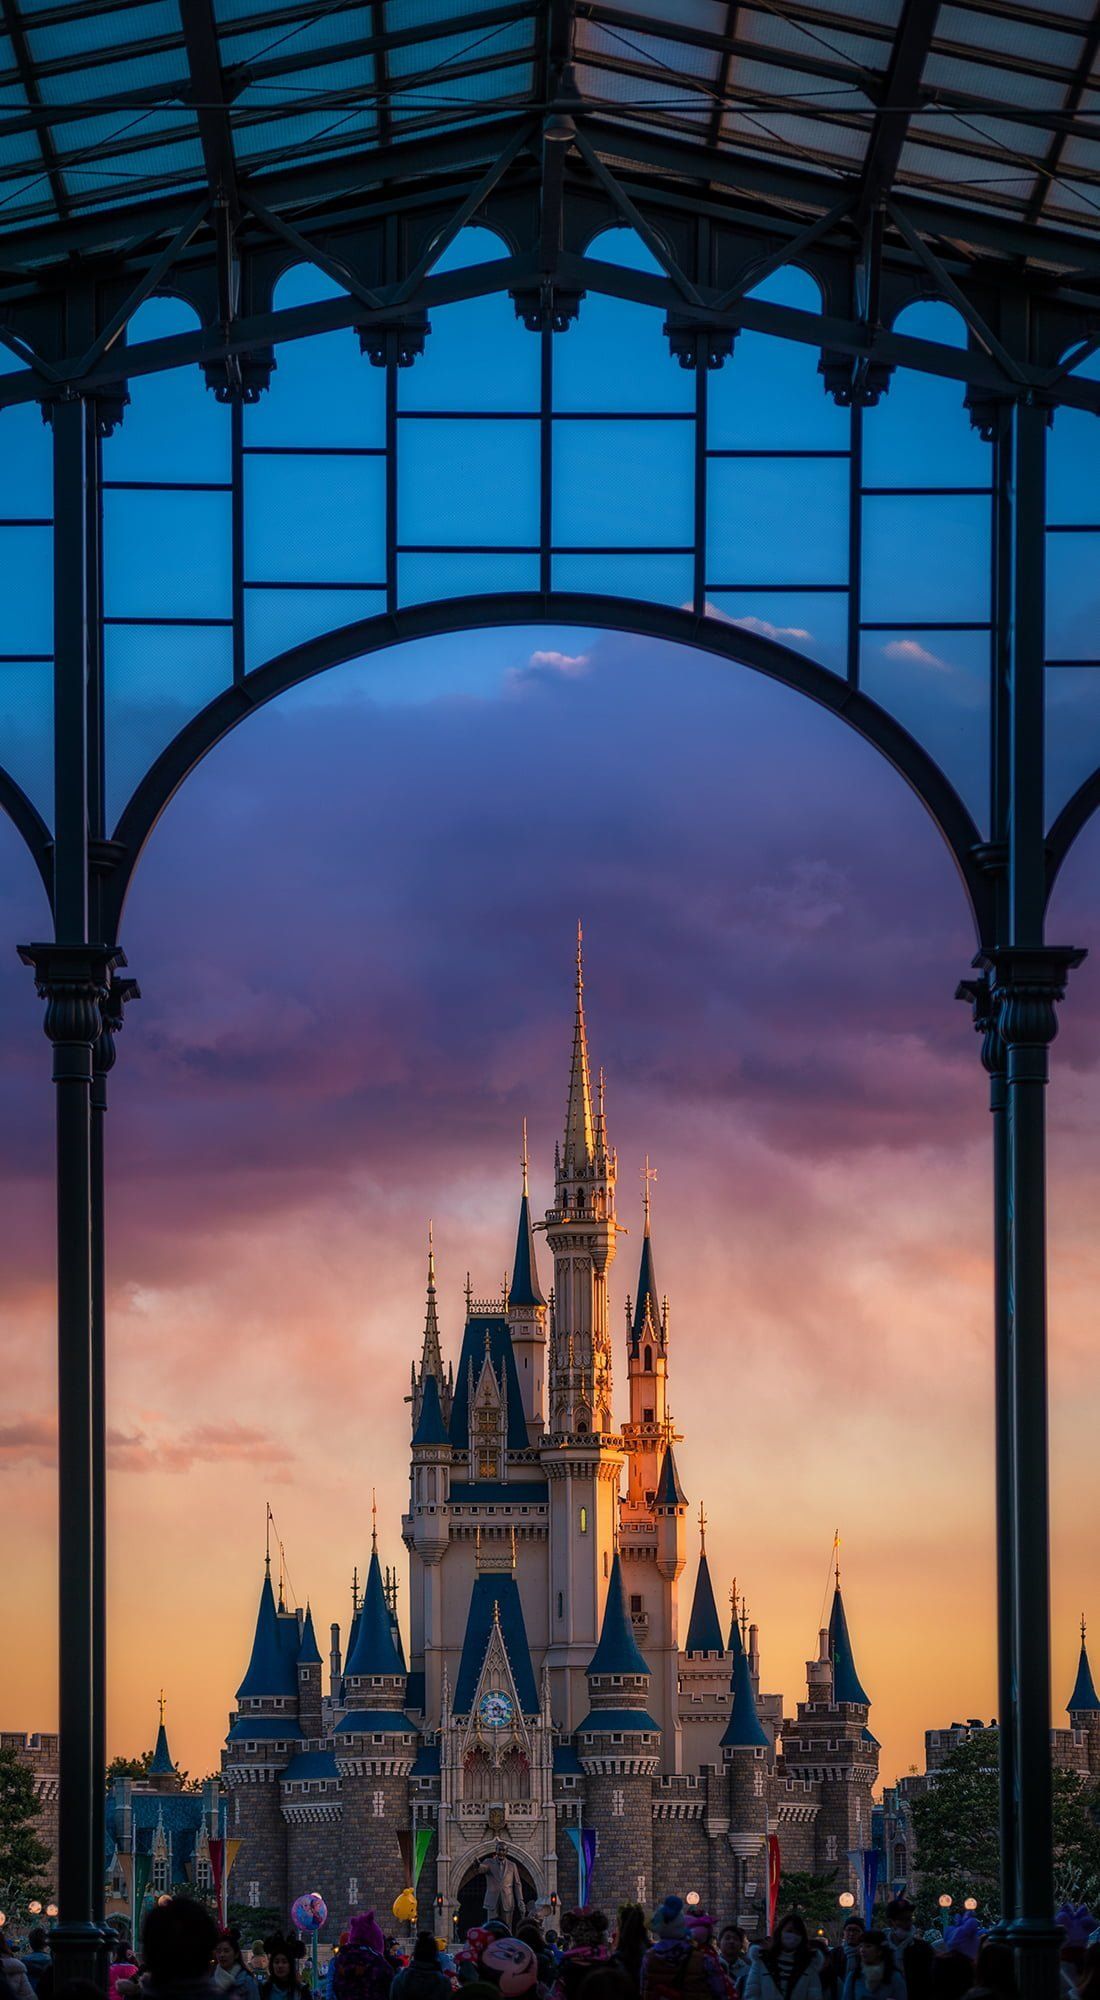 The beautiful and majestic castle of Disney Land during sunset - Disneyland